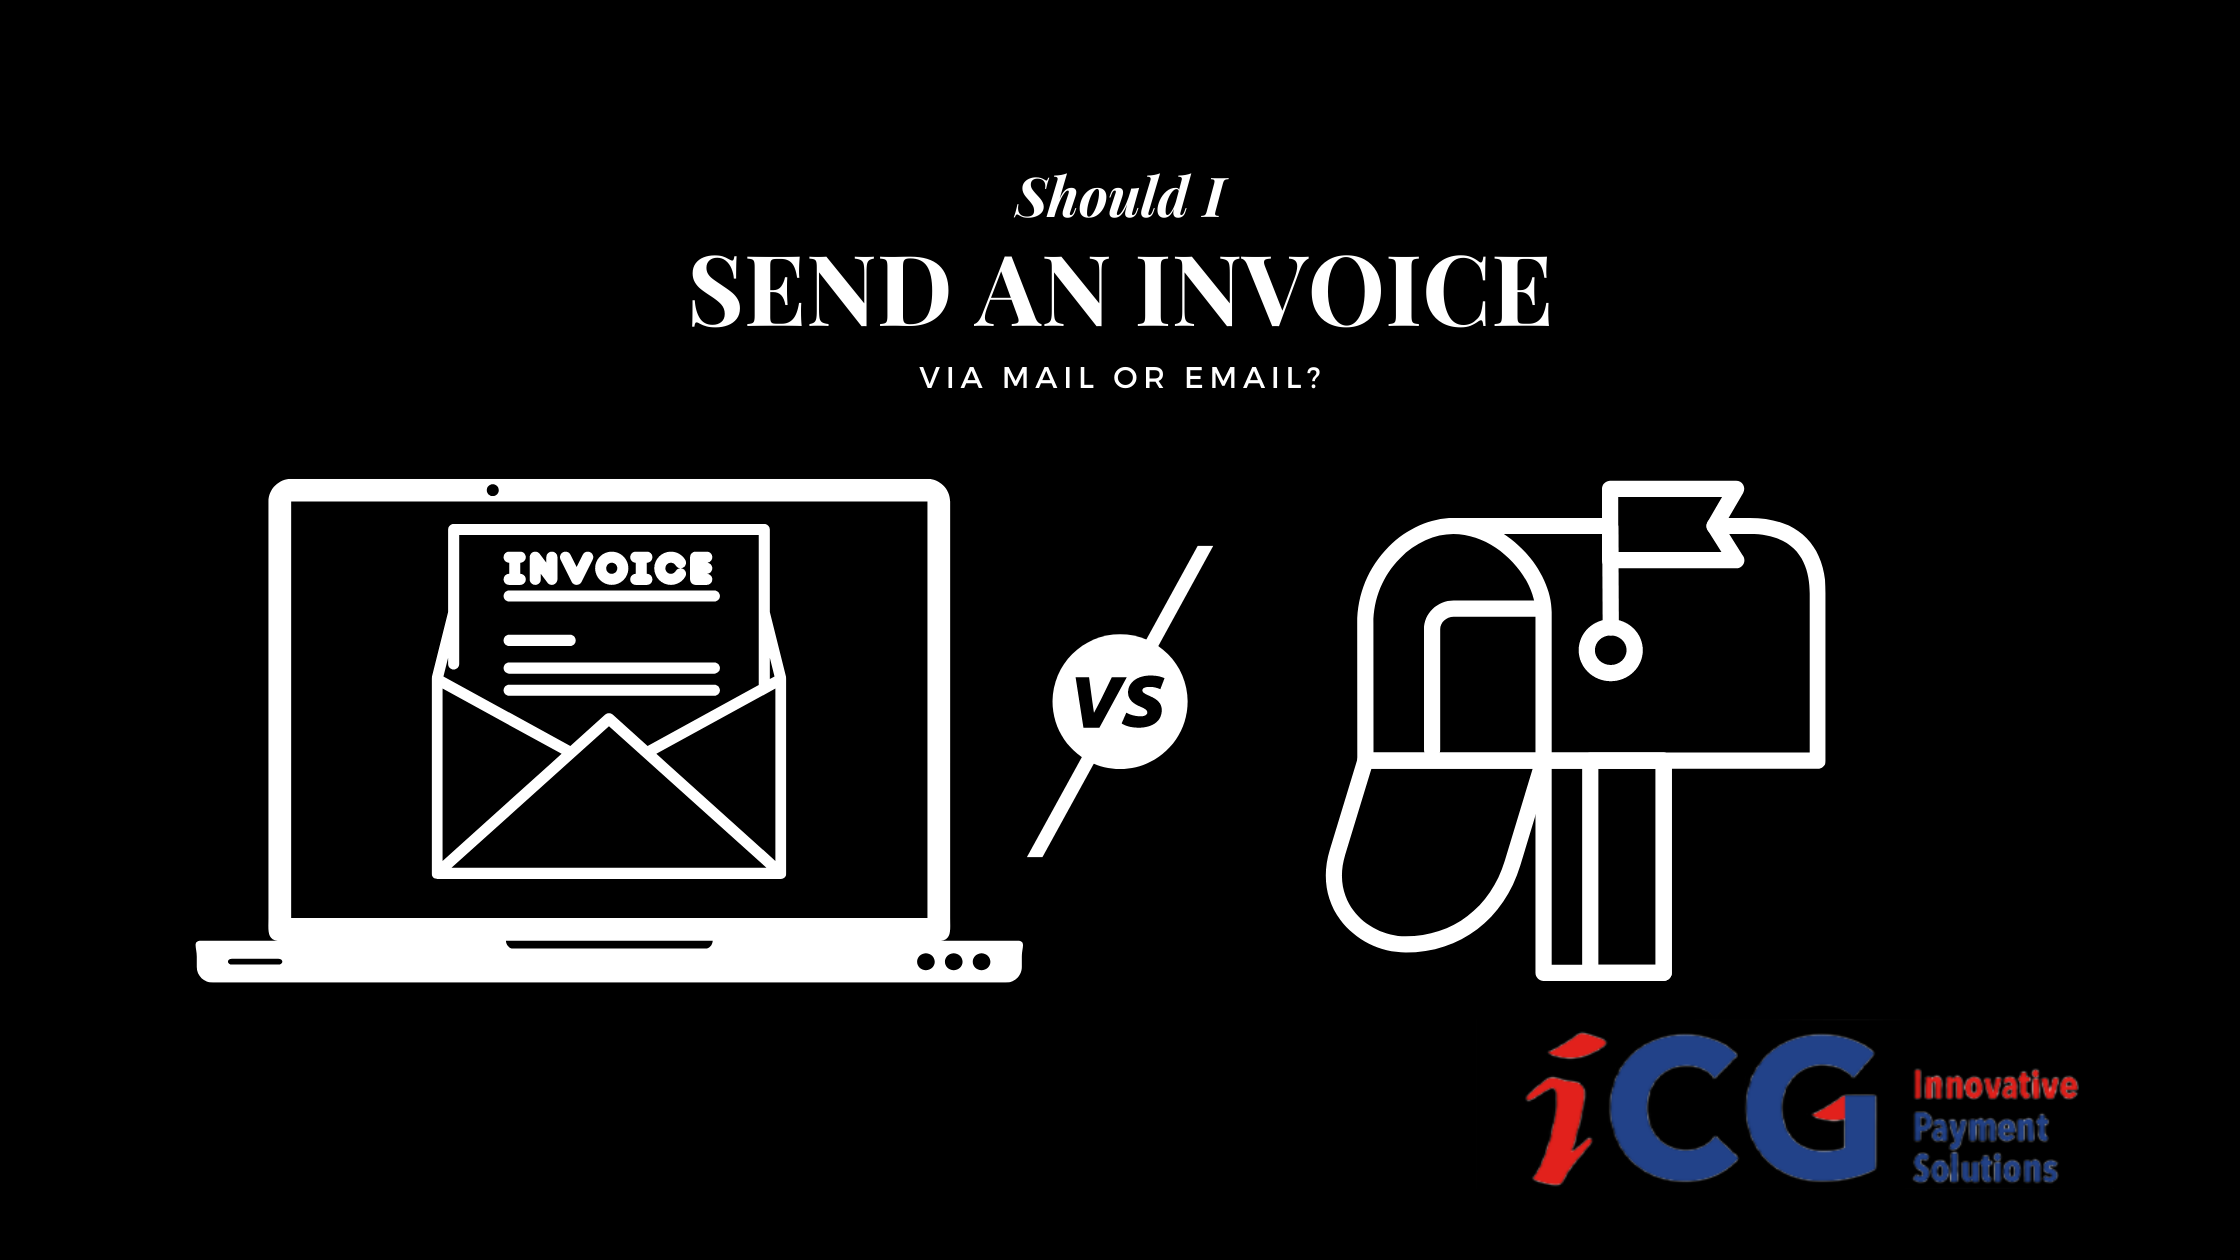 Should I Send an Invoice via Mail or Email?